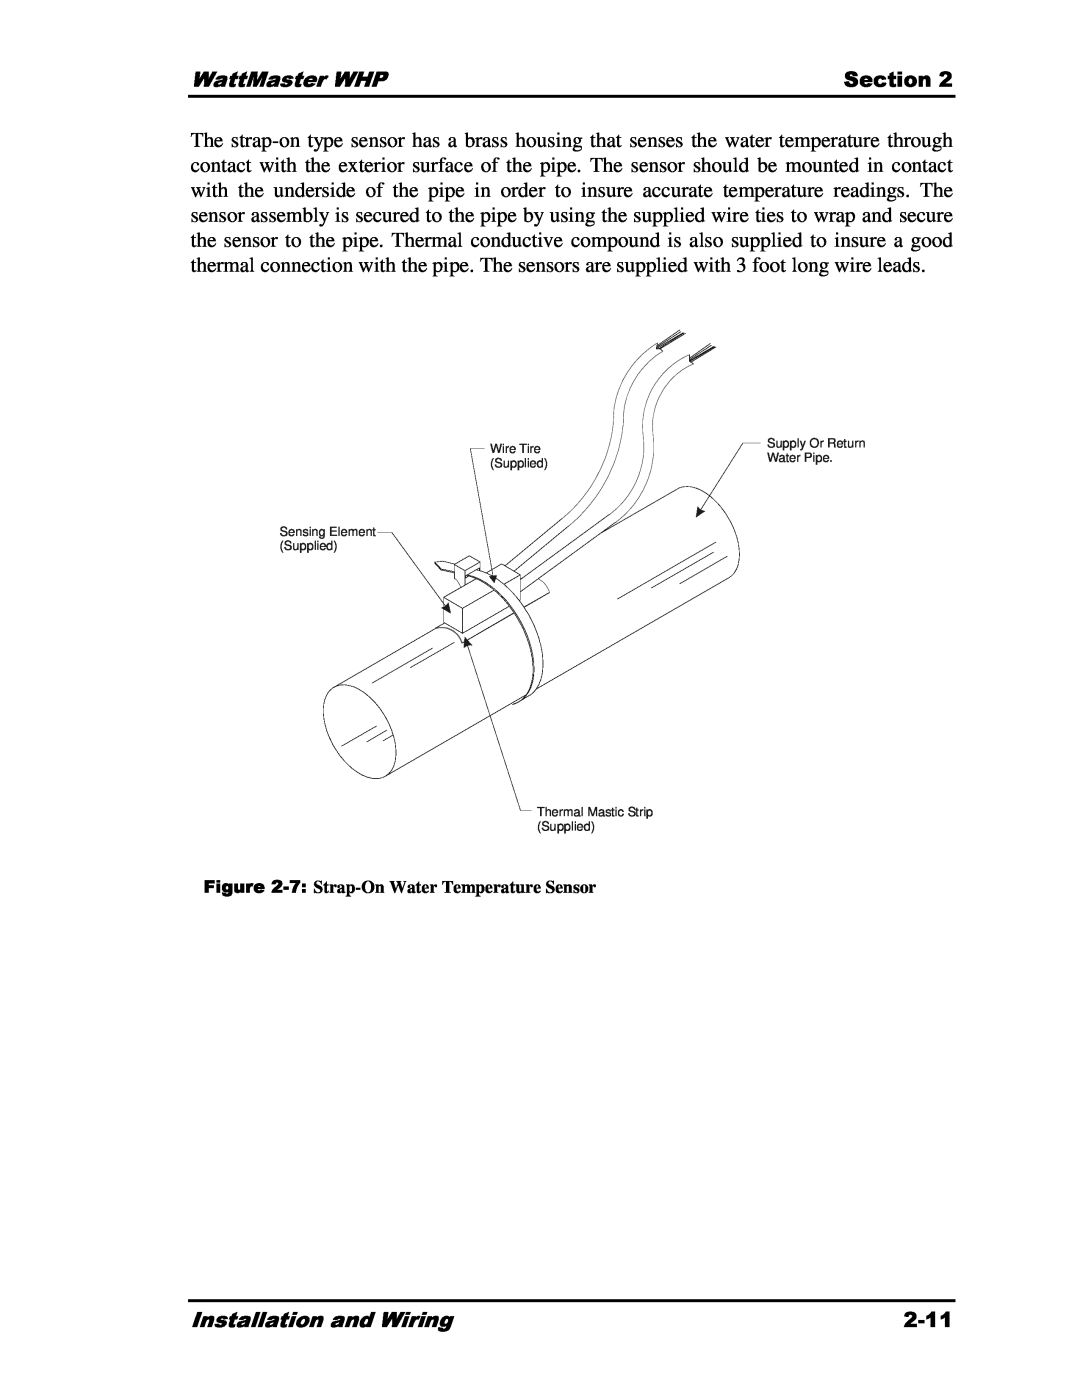 Heat Controller Water Source Heat Pump manual 7, WattMaster WHP, Section, Installation and Wiring, 2-11 